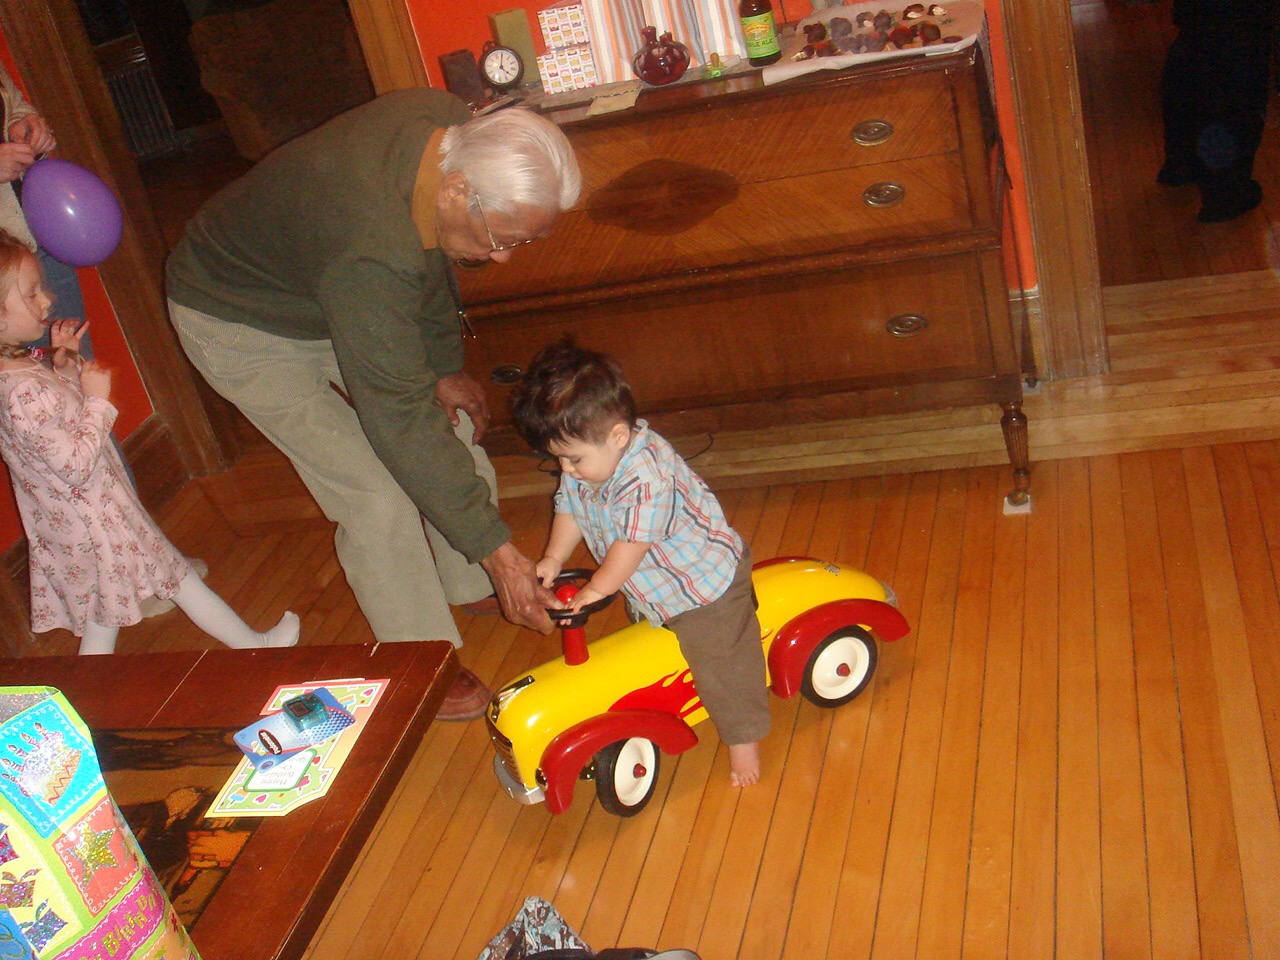 Party's over, but Dad shows Jin the horn on his new push car.